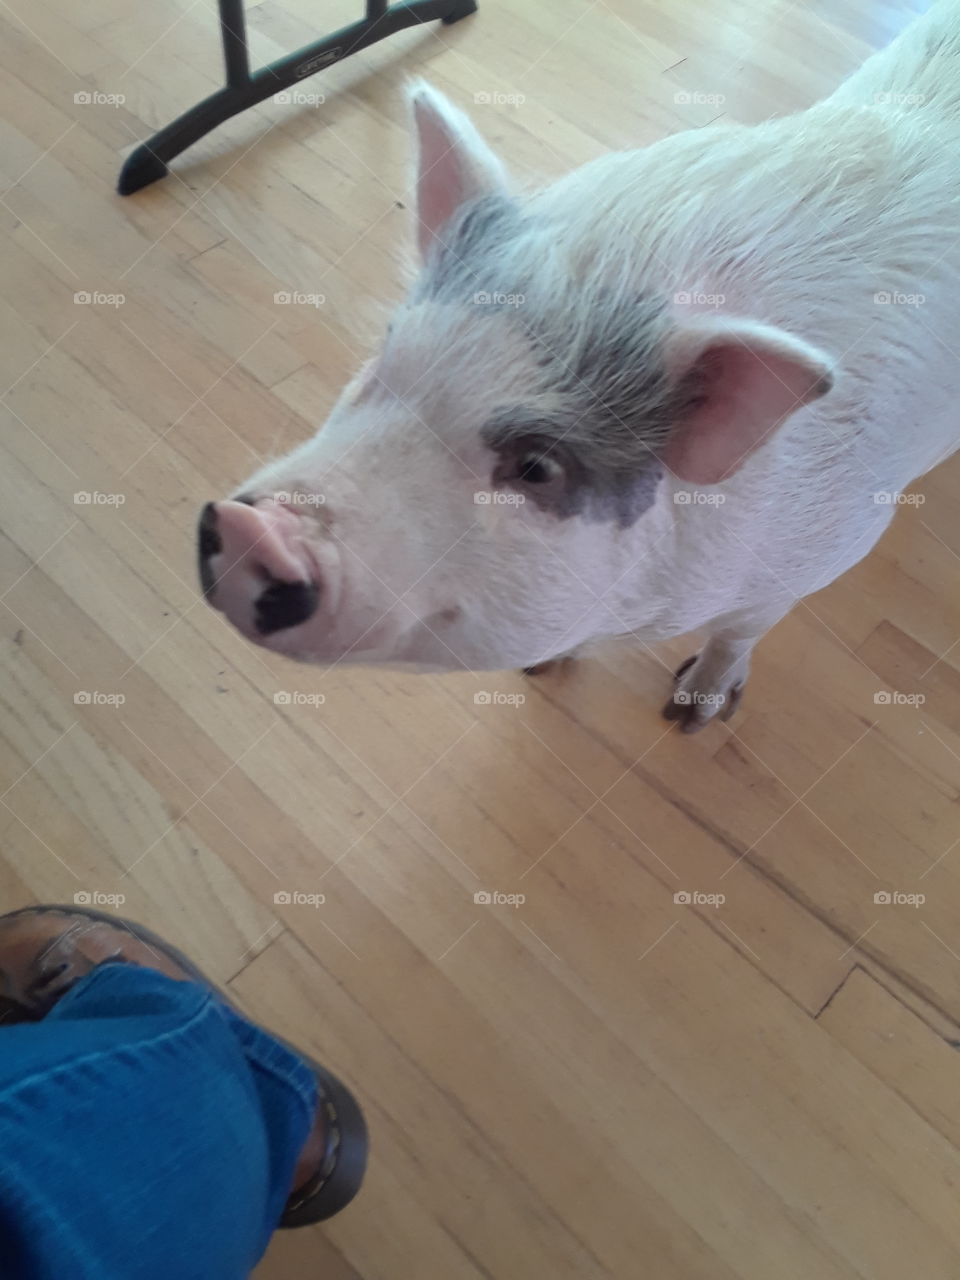 pot belly pet pig named Petunia on Thanksgiving day hanging out